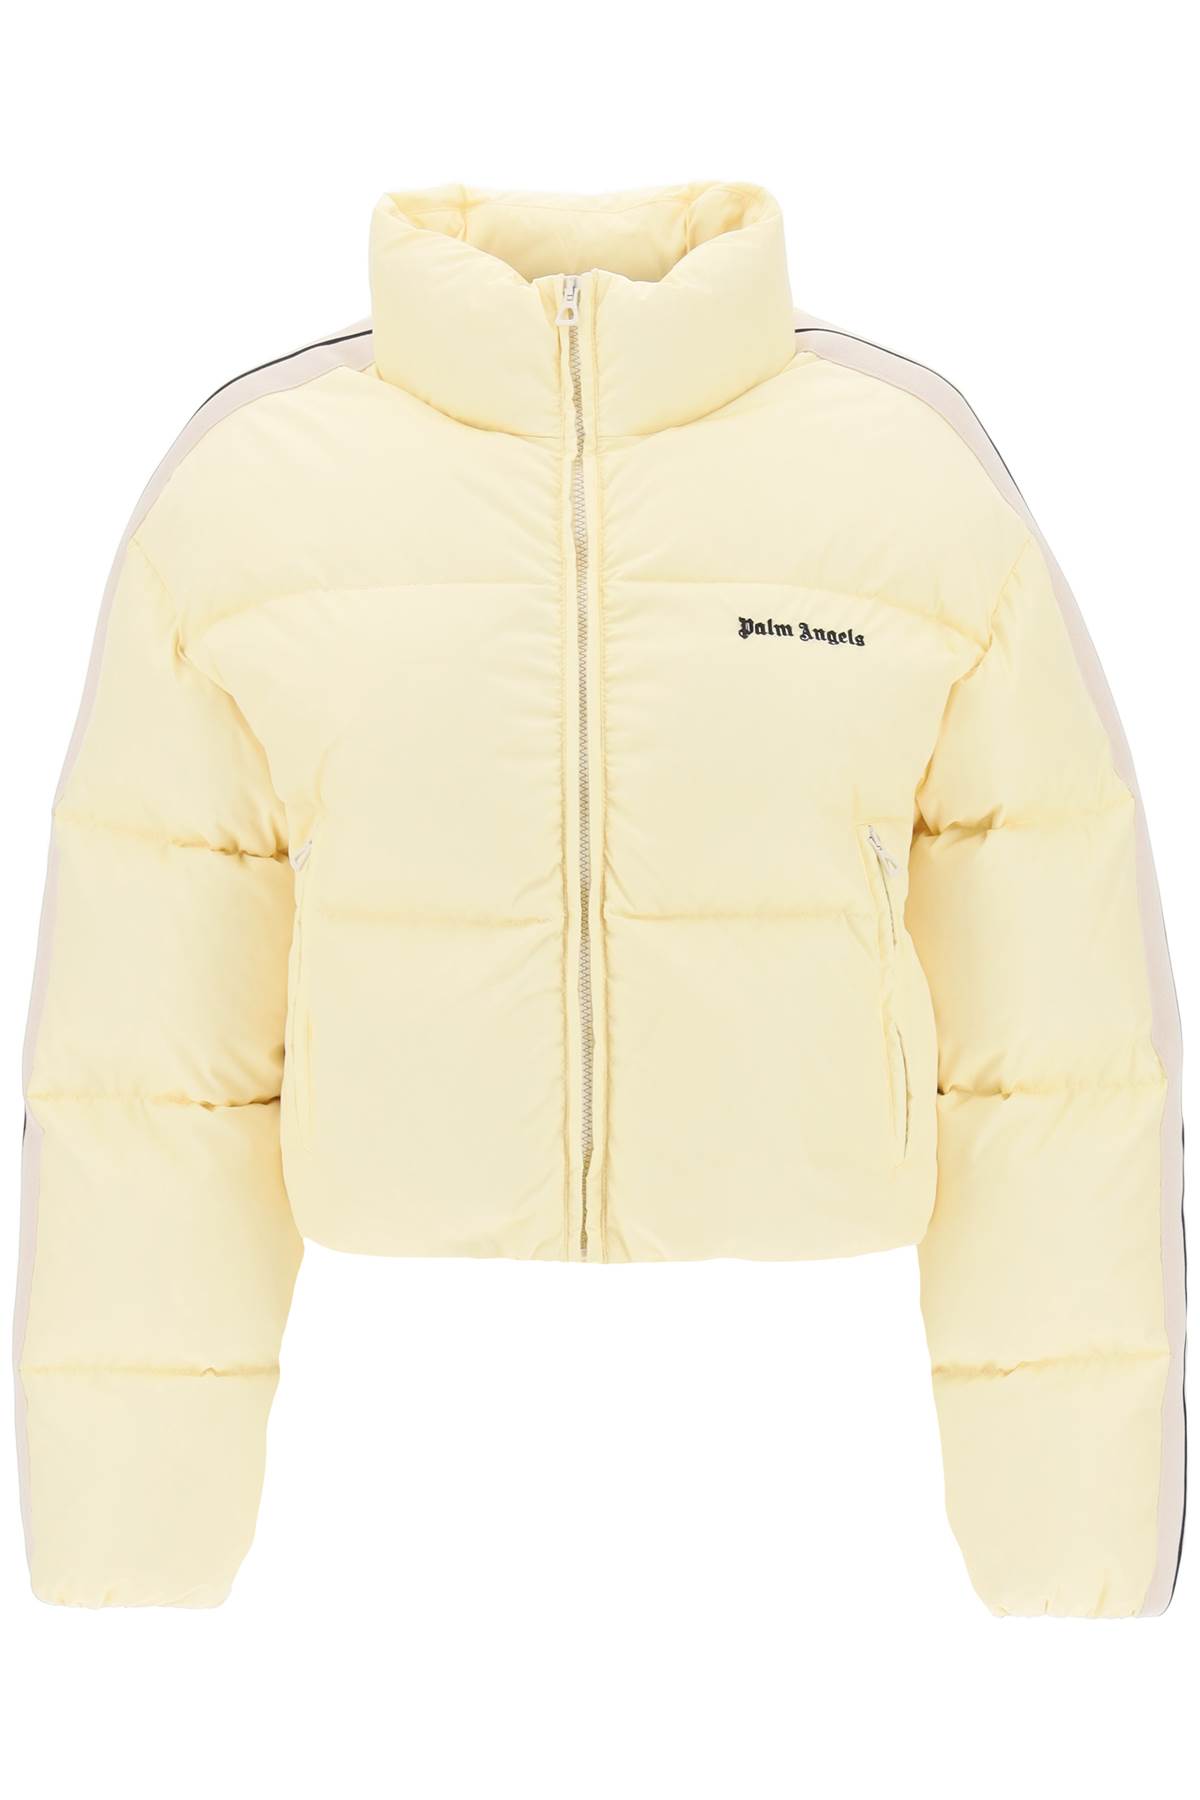 Palm Angels Short Down Jacket In Butter Black (yellow)